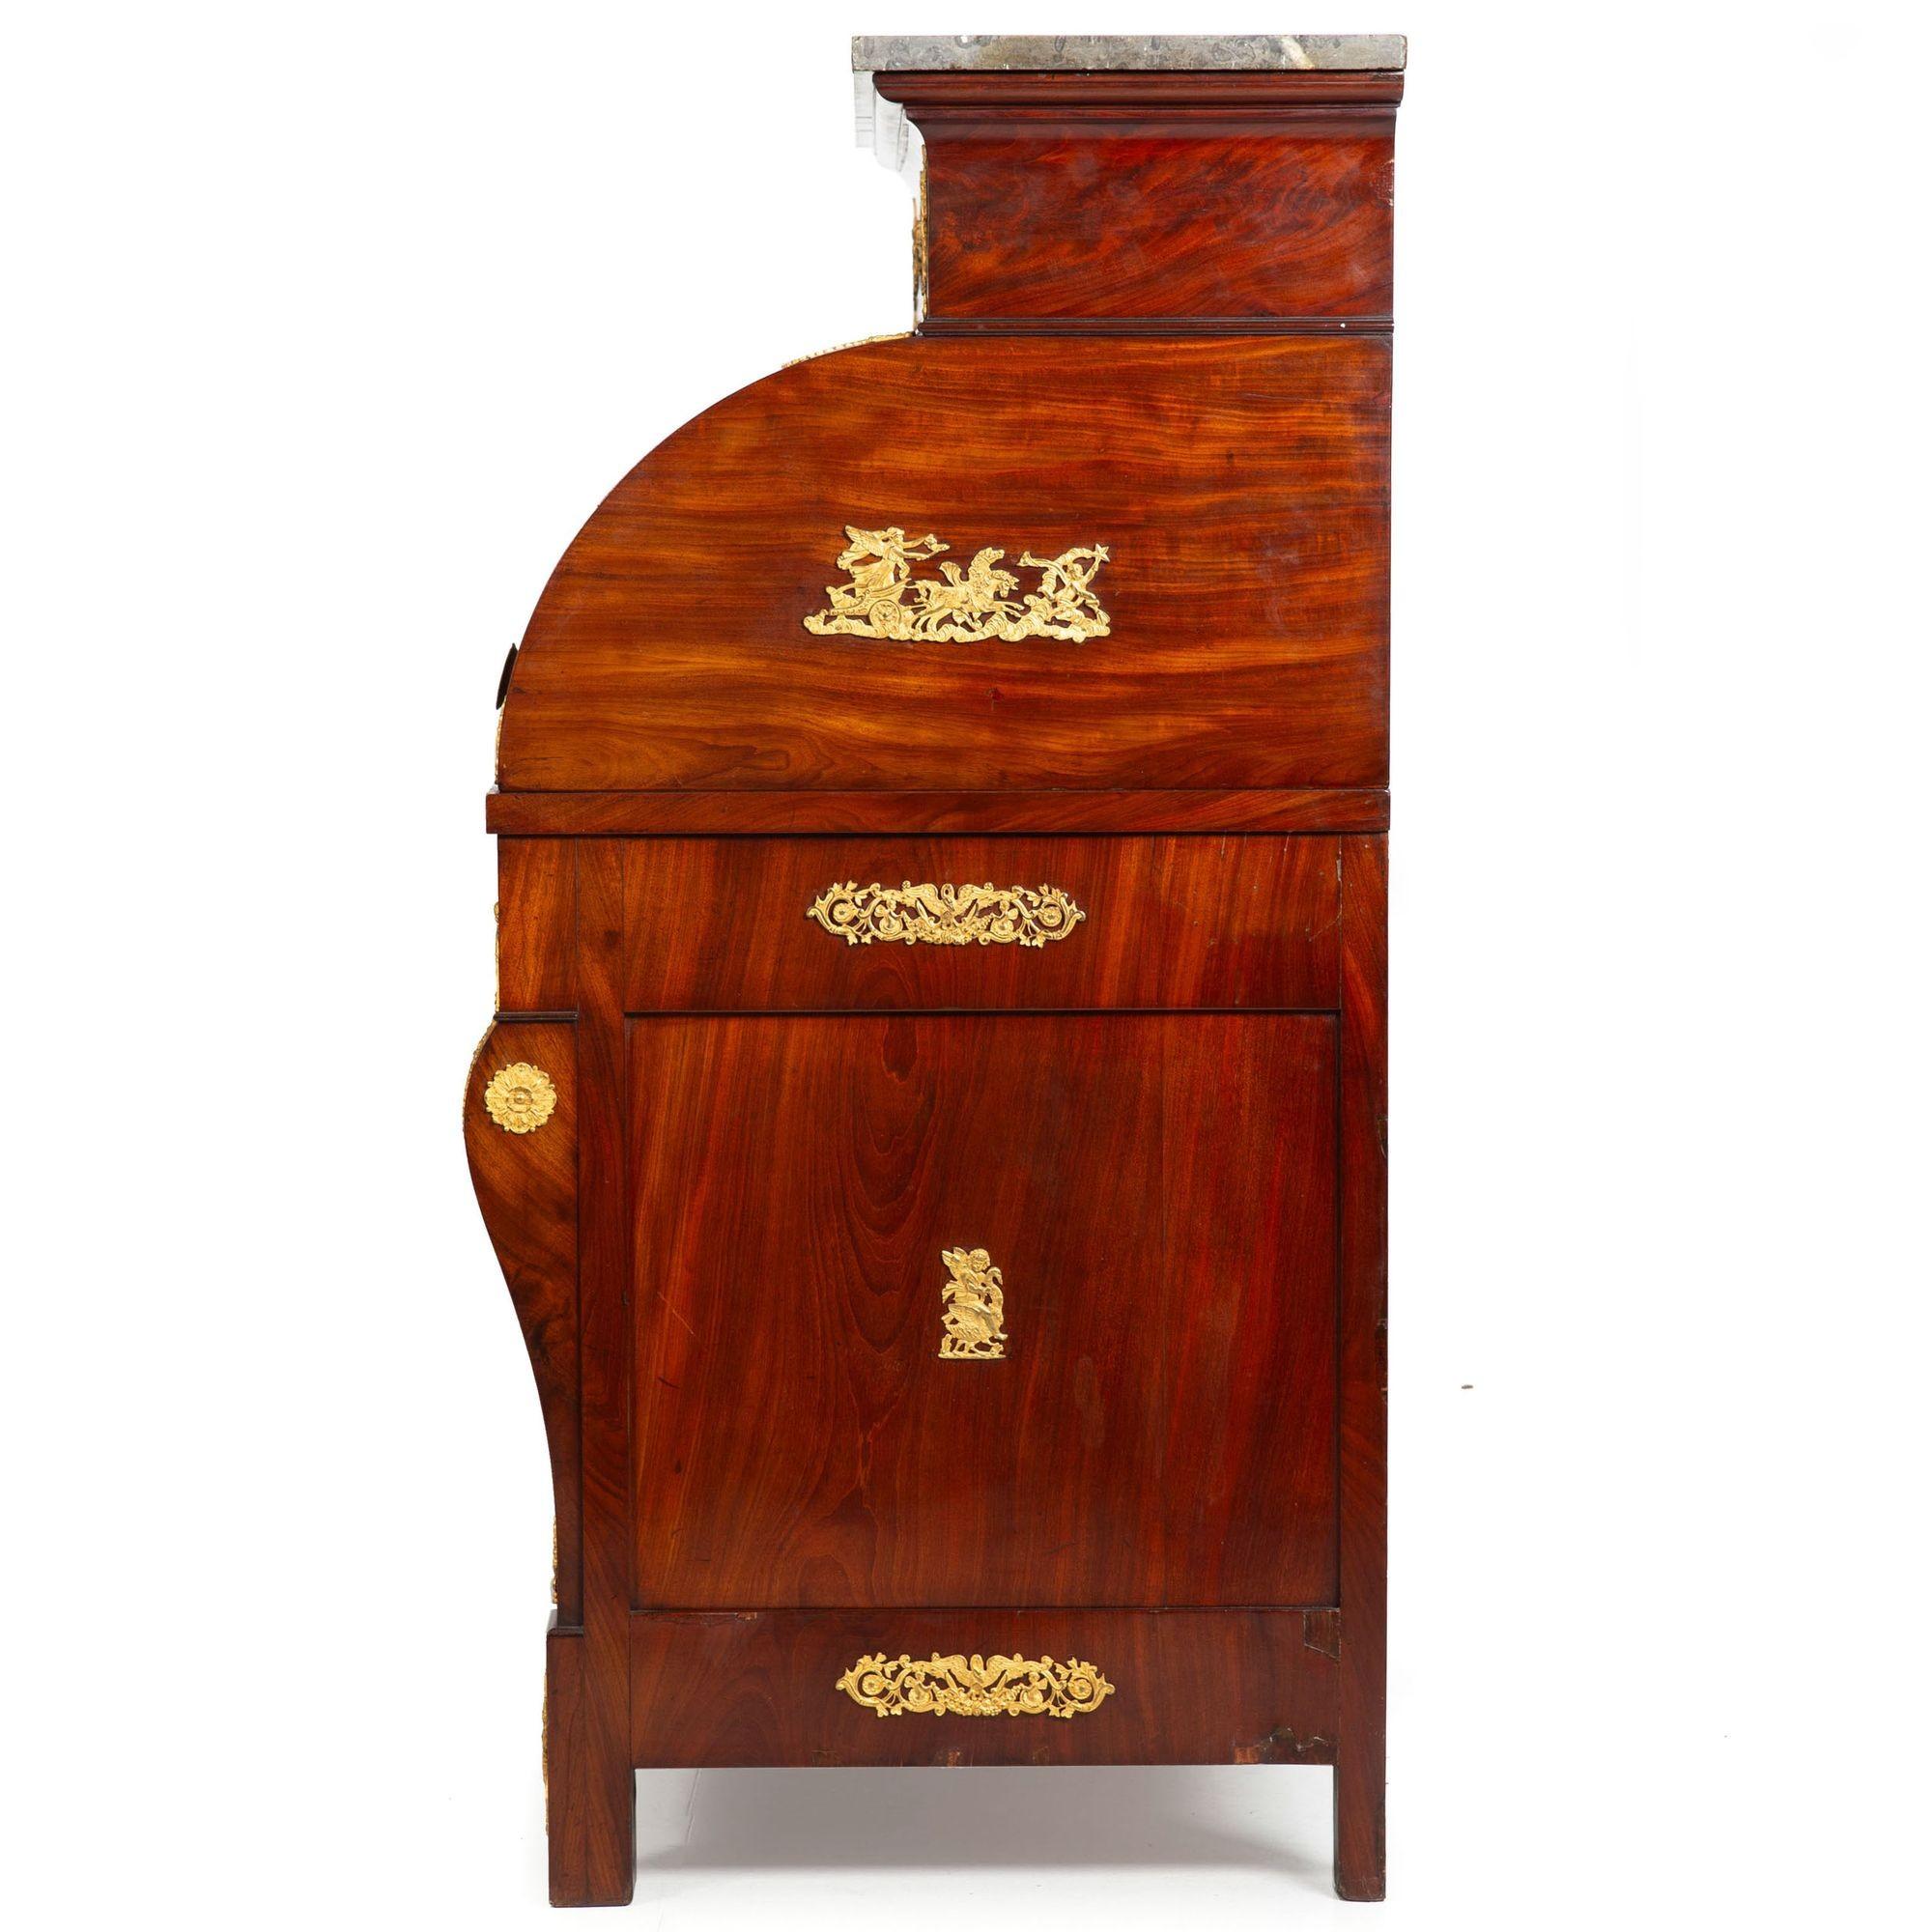 English French Restauration Antique Mahogany Cylinder Roll-Top Desk circa 1830 For Sale